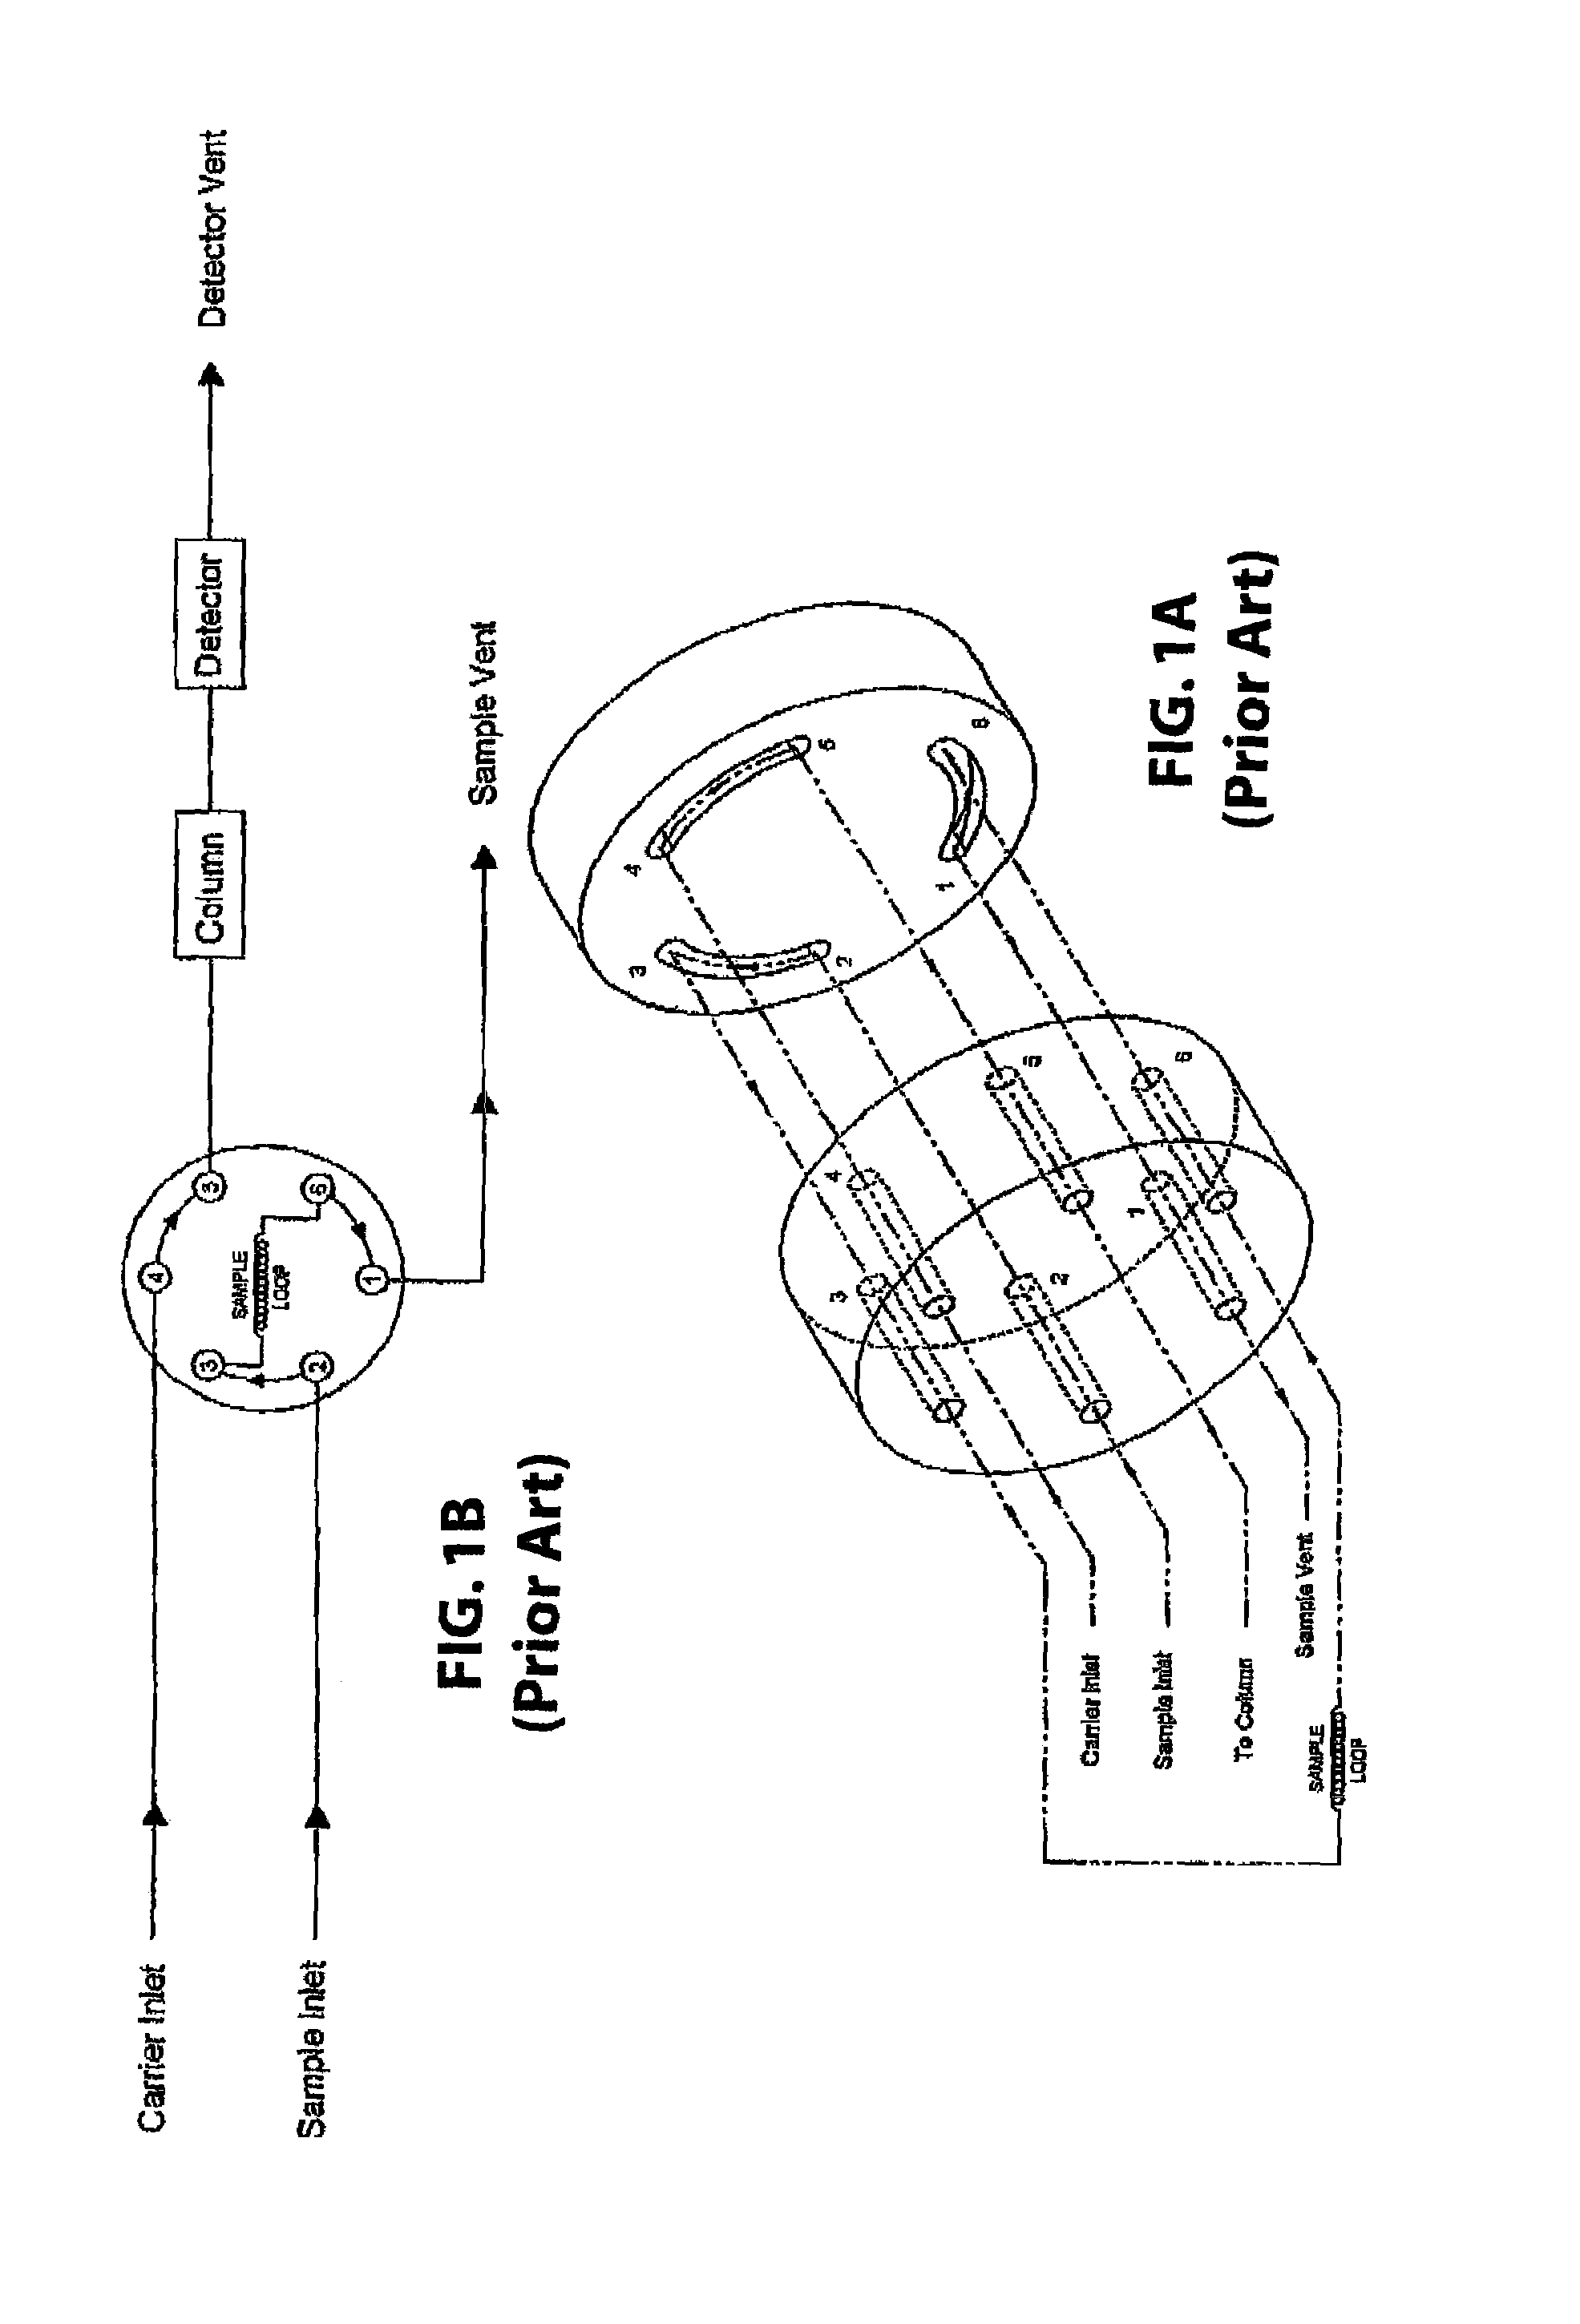 Rotary valve and analytical chromatographic system using the same